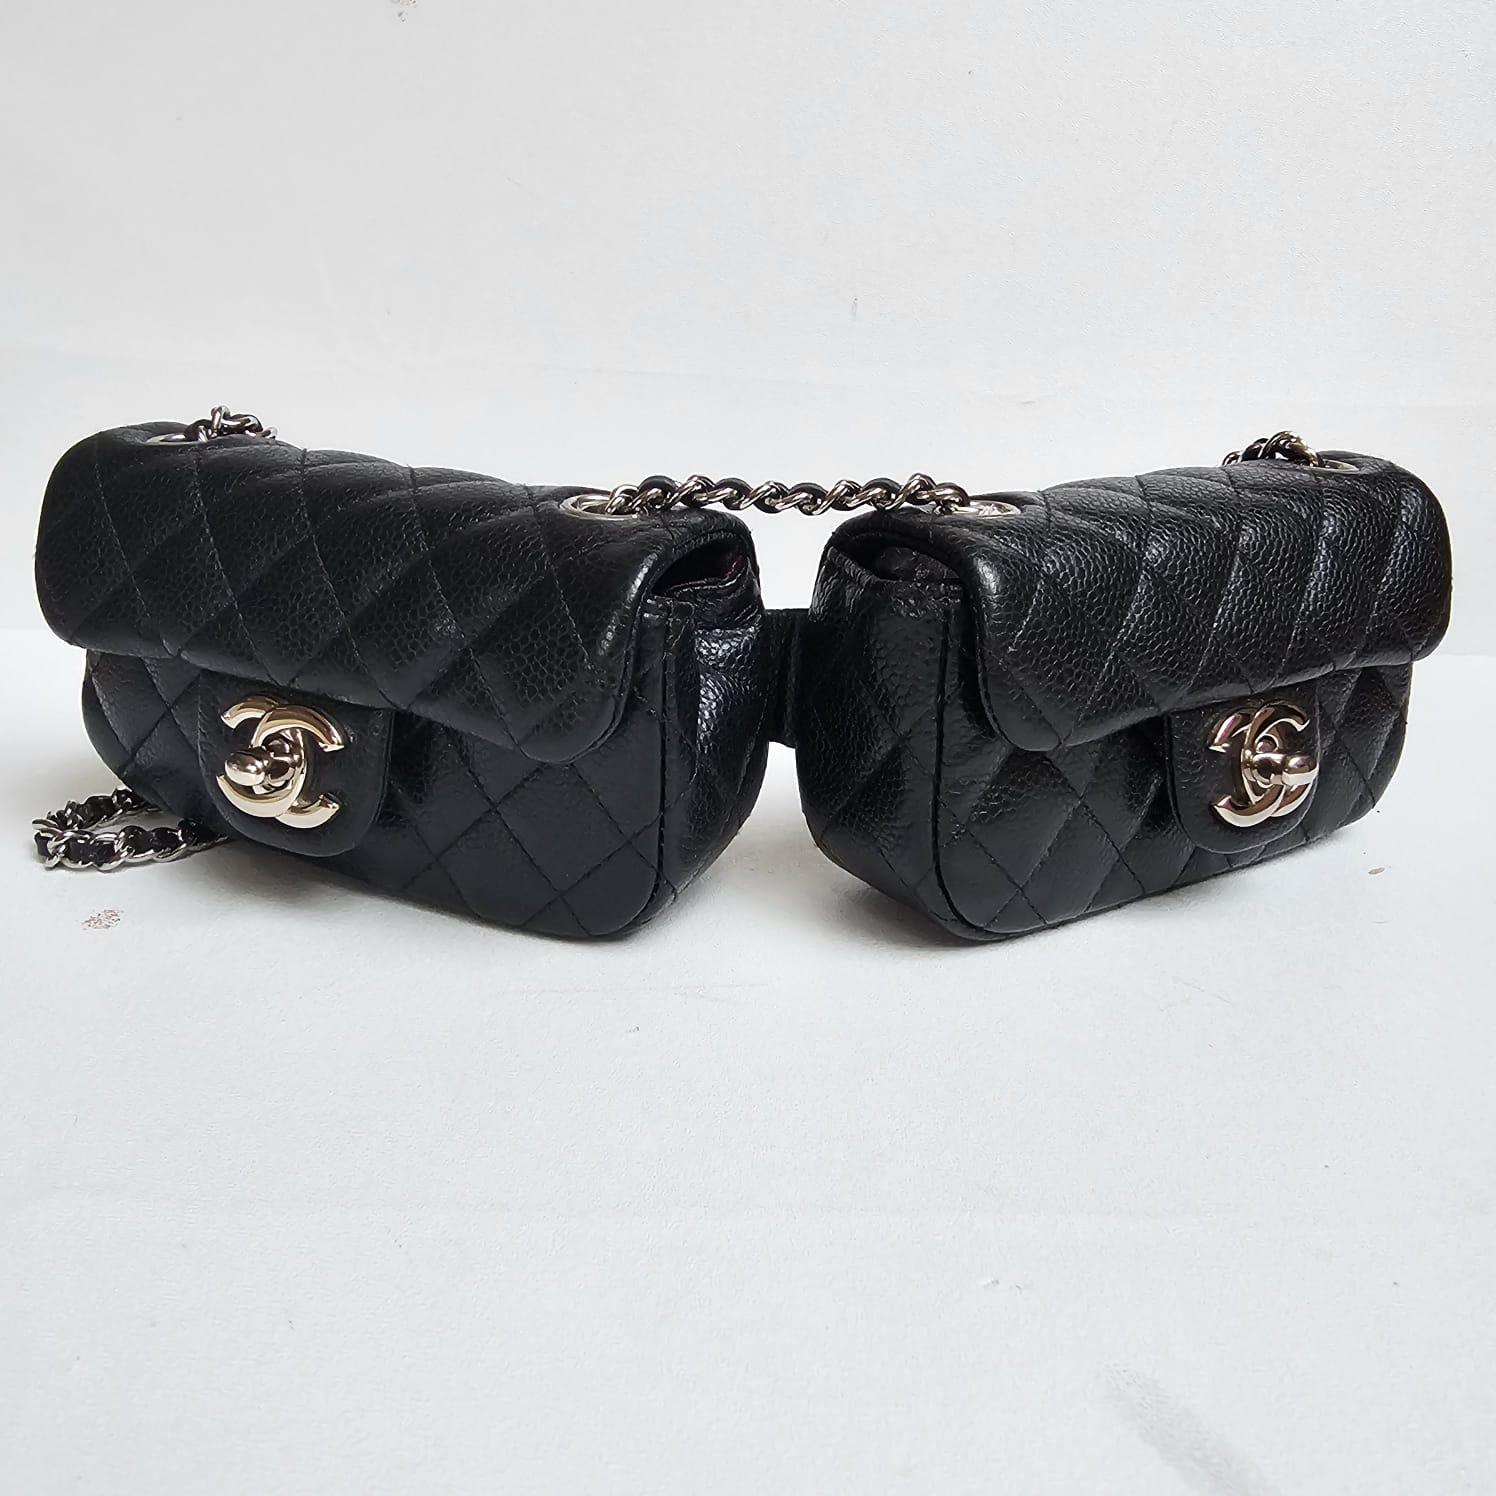 Rare chanel mini twin bags with silver hardware. Very cute statement piece. Series #15. Comes with holo sticker, dust bag and box. Overall in very good condition. Each of the mini bag size is 13 x 8 x 3.5 cm. 